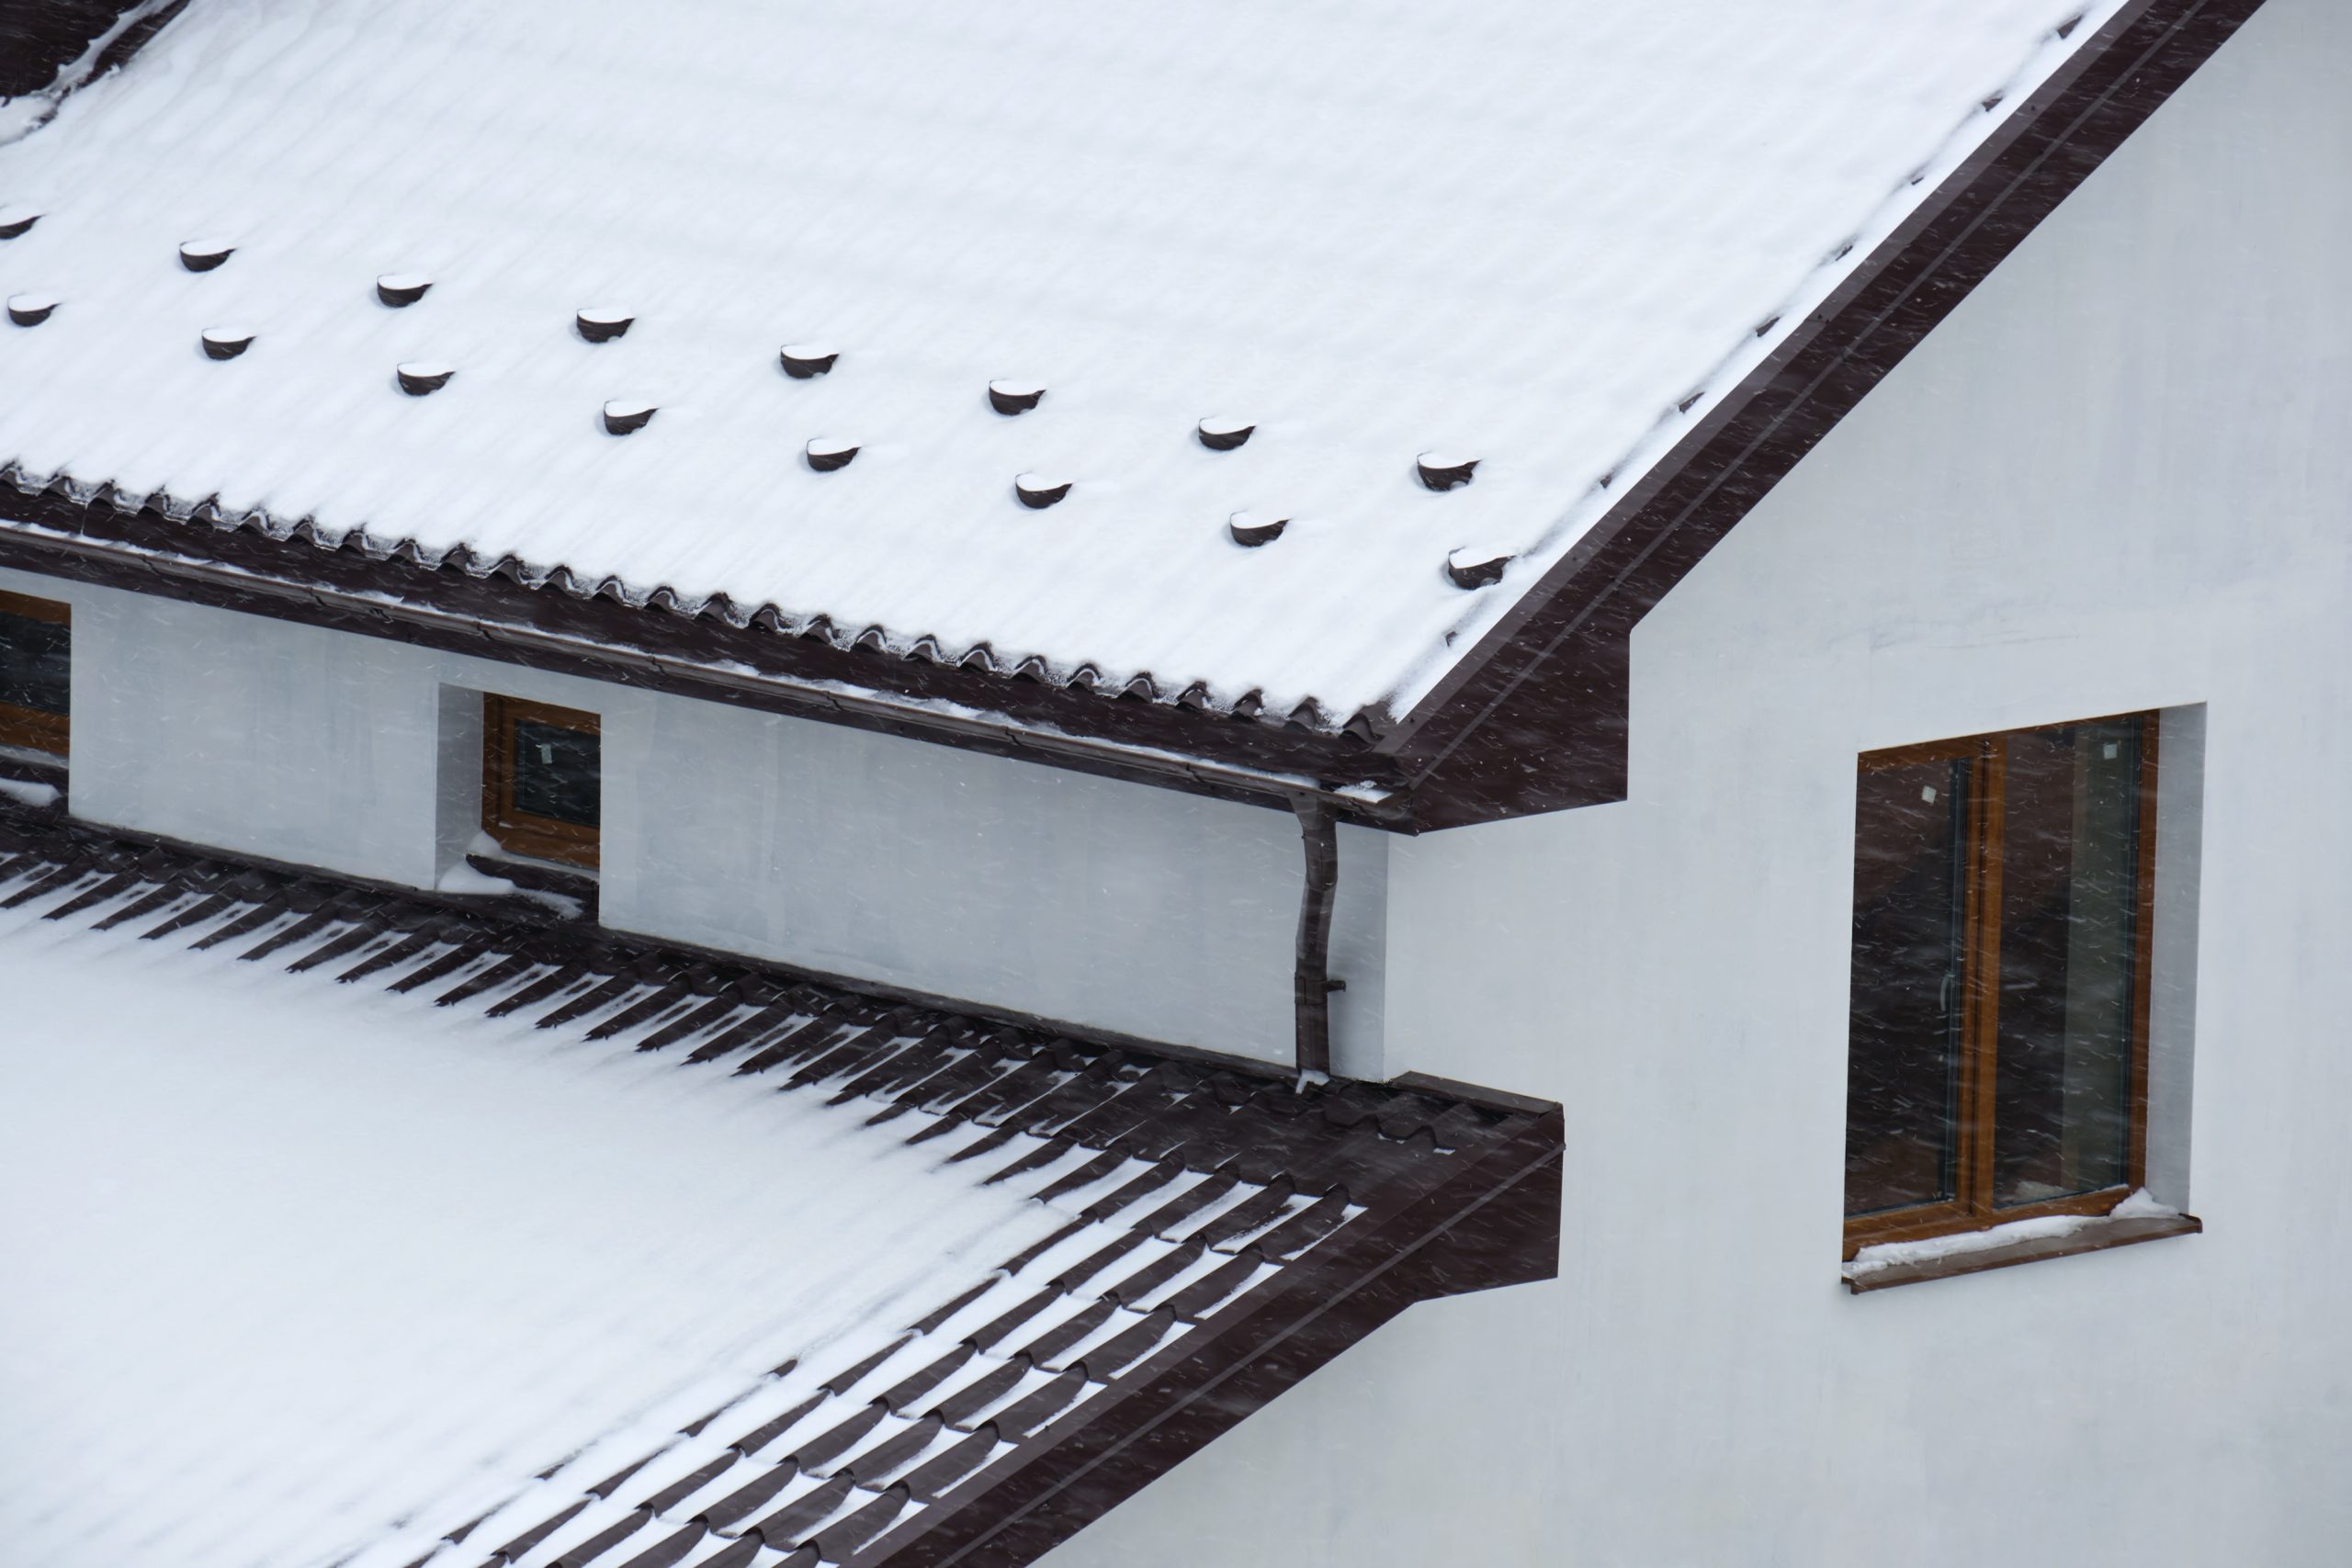 How Do You Protect Gutters in Heavy Snow?